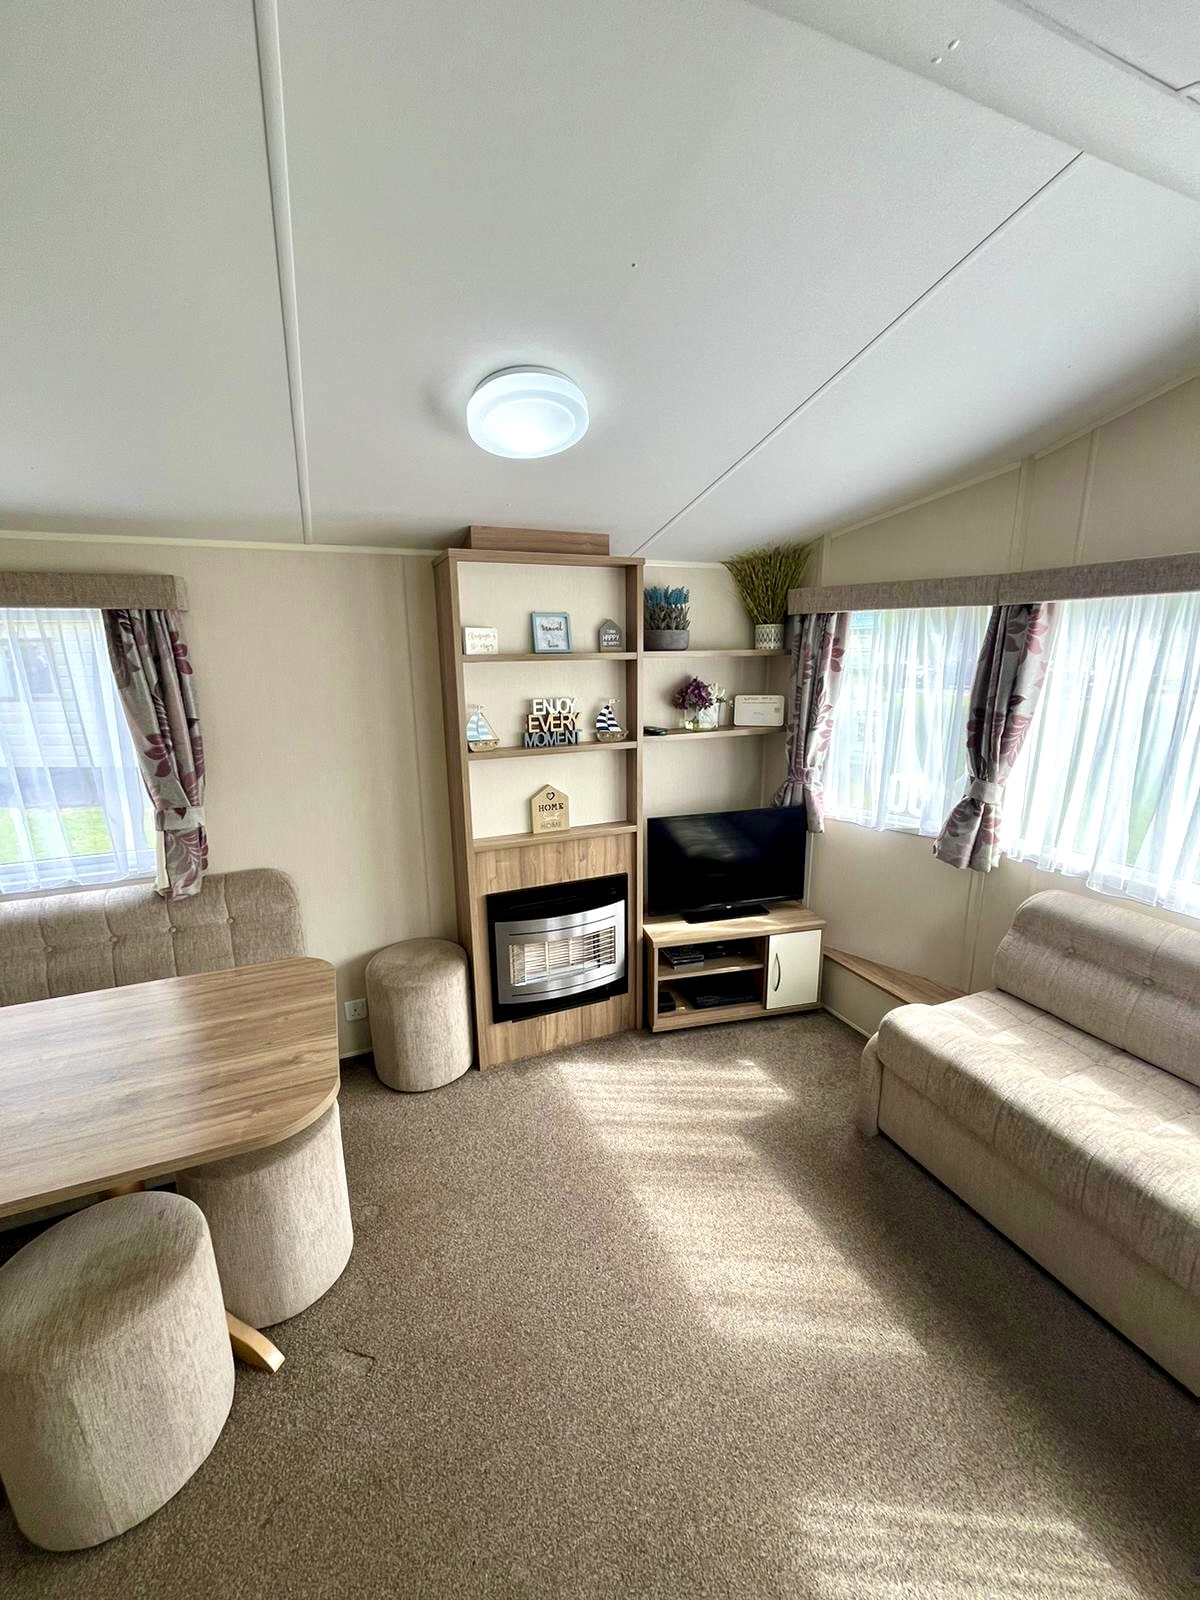 Used 2017 Willerby Rio Gold for sale at Butlins Minehead